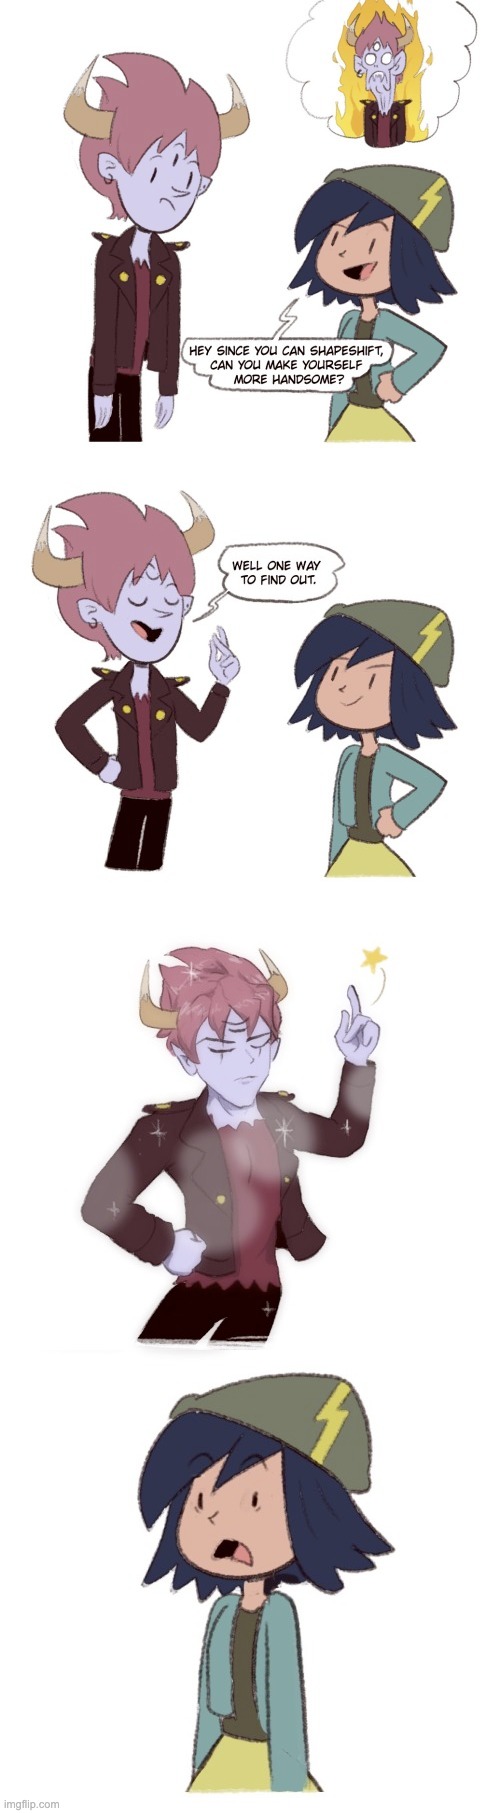 MorningMark - When you are so good at shapeshifting you turned into anime. | image tagged in morningmarks,svtfoe,comics/cartoons,star vs the forces of evil,comics,memes | made w/ Imgflip meme maker